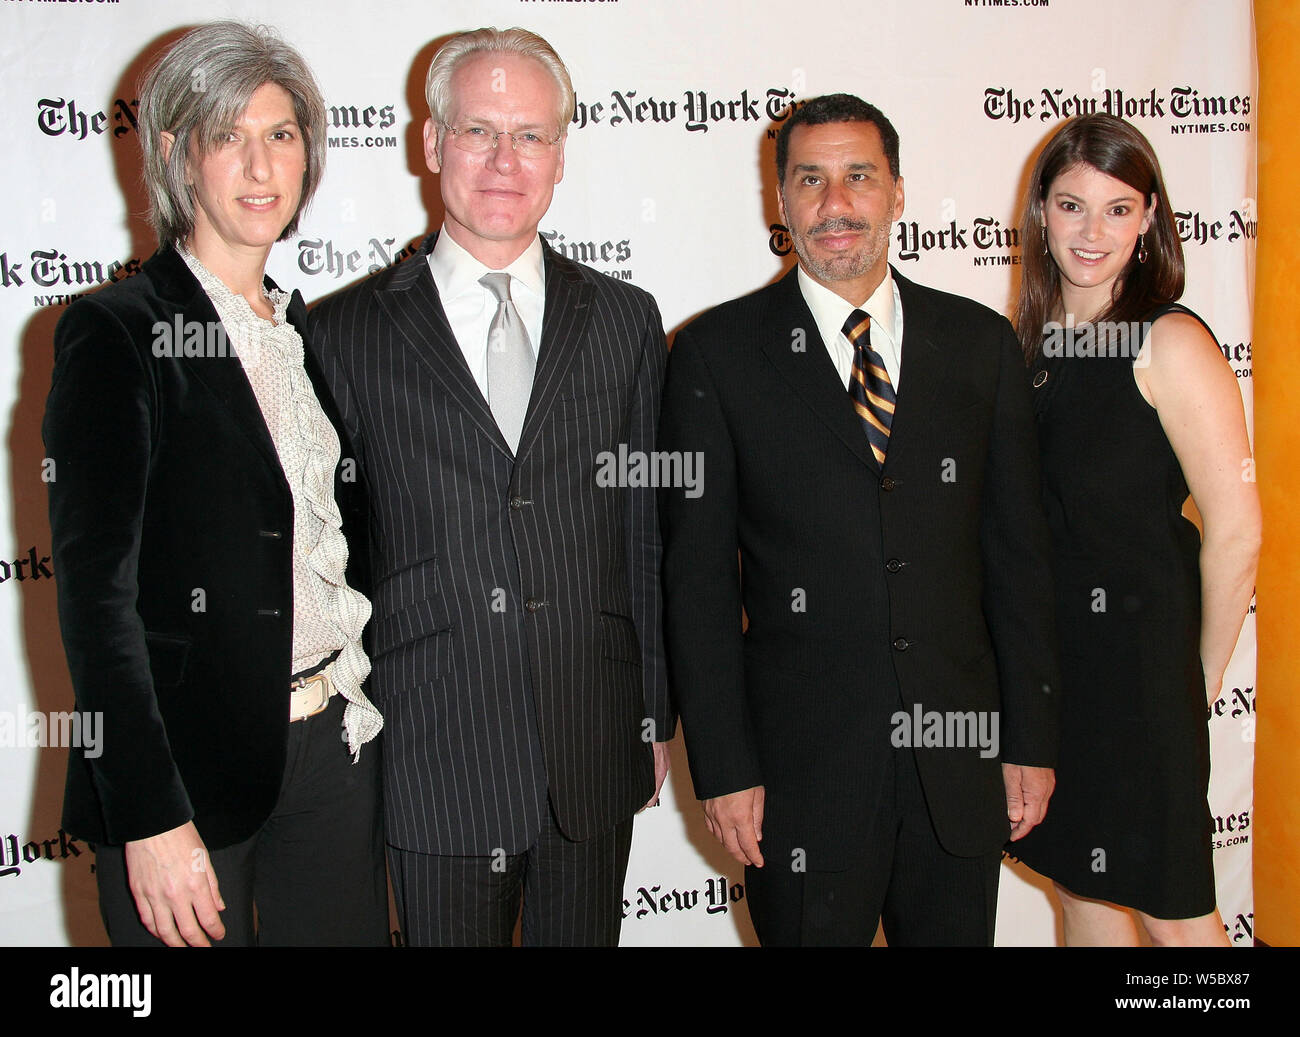 New York, USA. 4 May, 2008. Lauren Zalaznick, Tim Gunn, David A. Paterson, Gail Simmons at the Third Annual New York Times Sunday With The Magazine at The Times Center. Credit: Steve Mack/Alamy Stock Photo